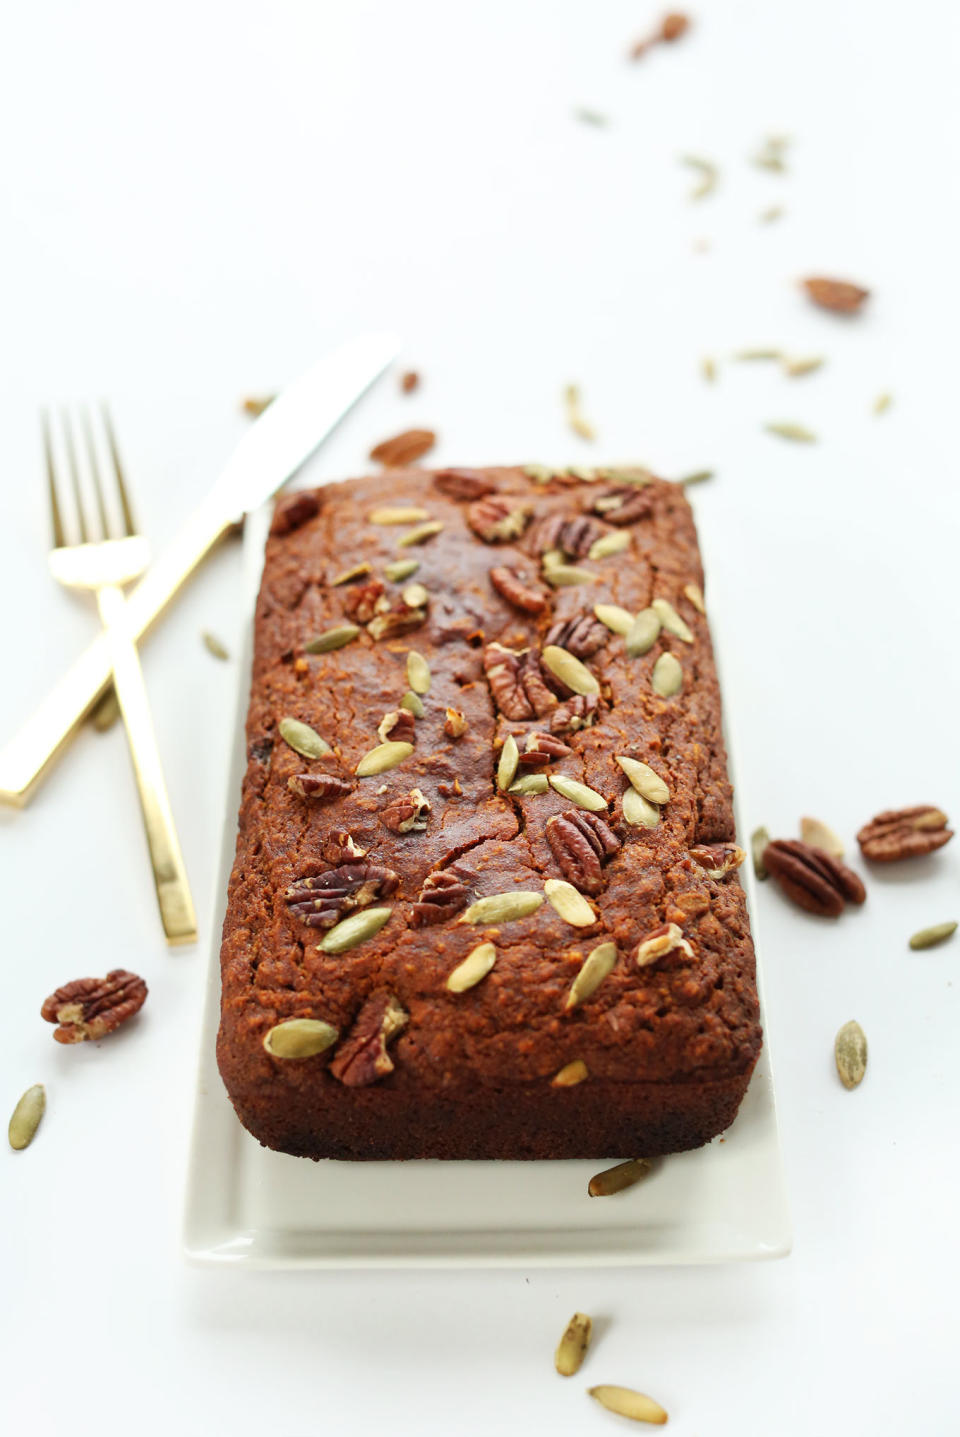 <strong>Get the <a href="http://minimalistbaker.com/1-bowl-pumpkin-bread-v-gf/#_a5y_p=2727797" target="_blank">One-Bowl Pumpkin Bread recipe</a> from Minimalist Baker</strong>